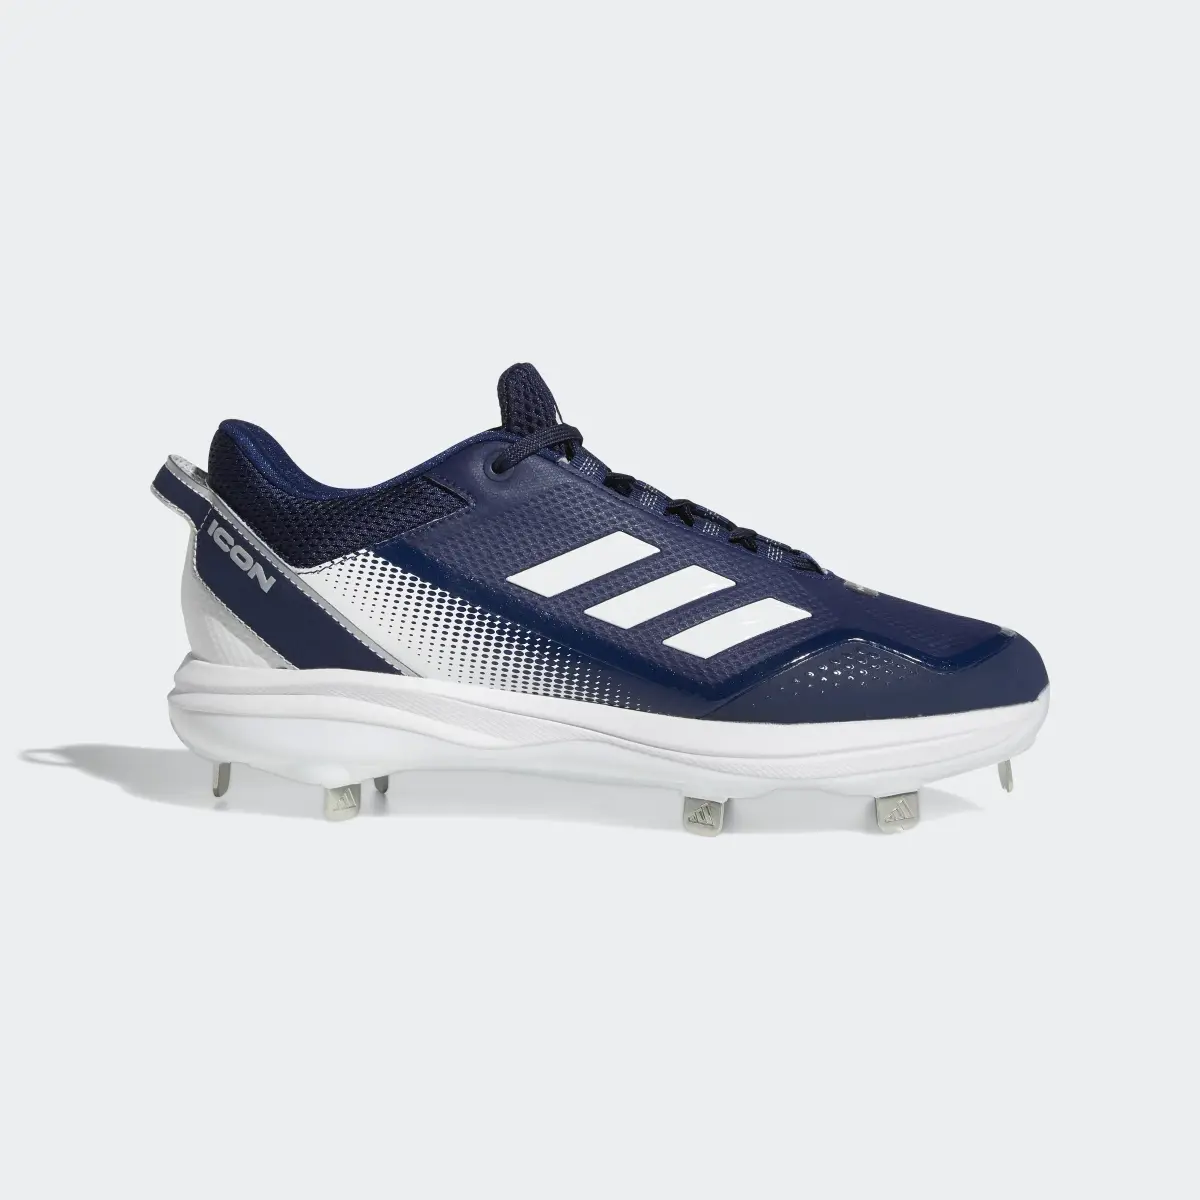 Adidas Icon 7 Cleats. 2